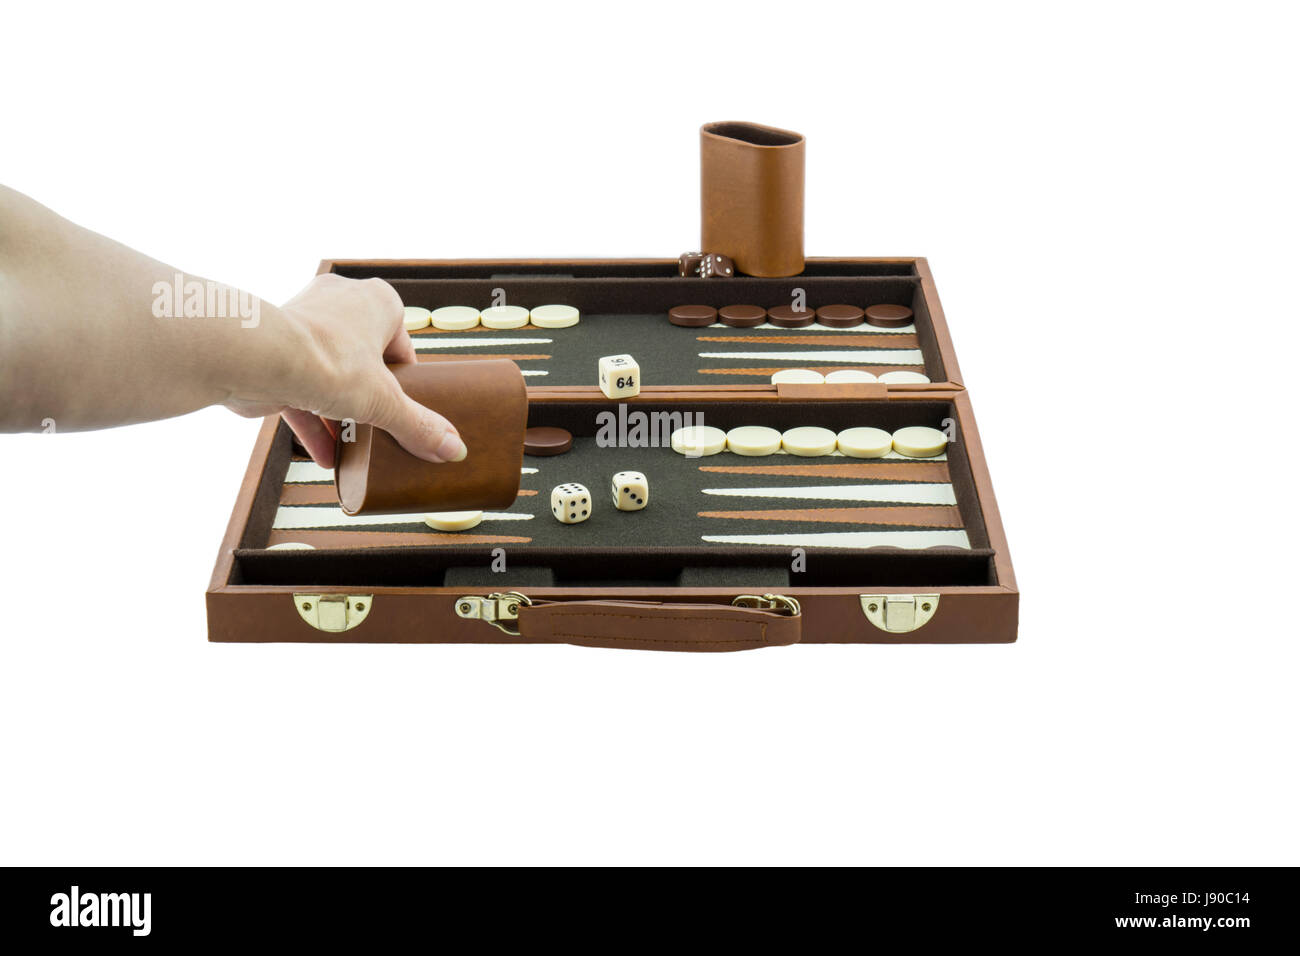 A woman's arm playing backgammon by throwing the die on the backgammon board with her left hand. Isolated on a pure white background. Stock Photo